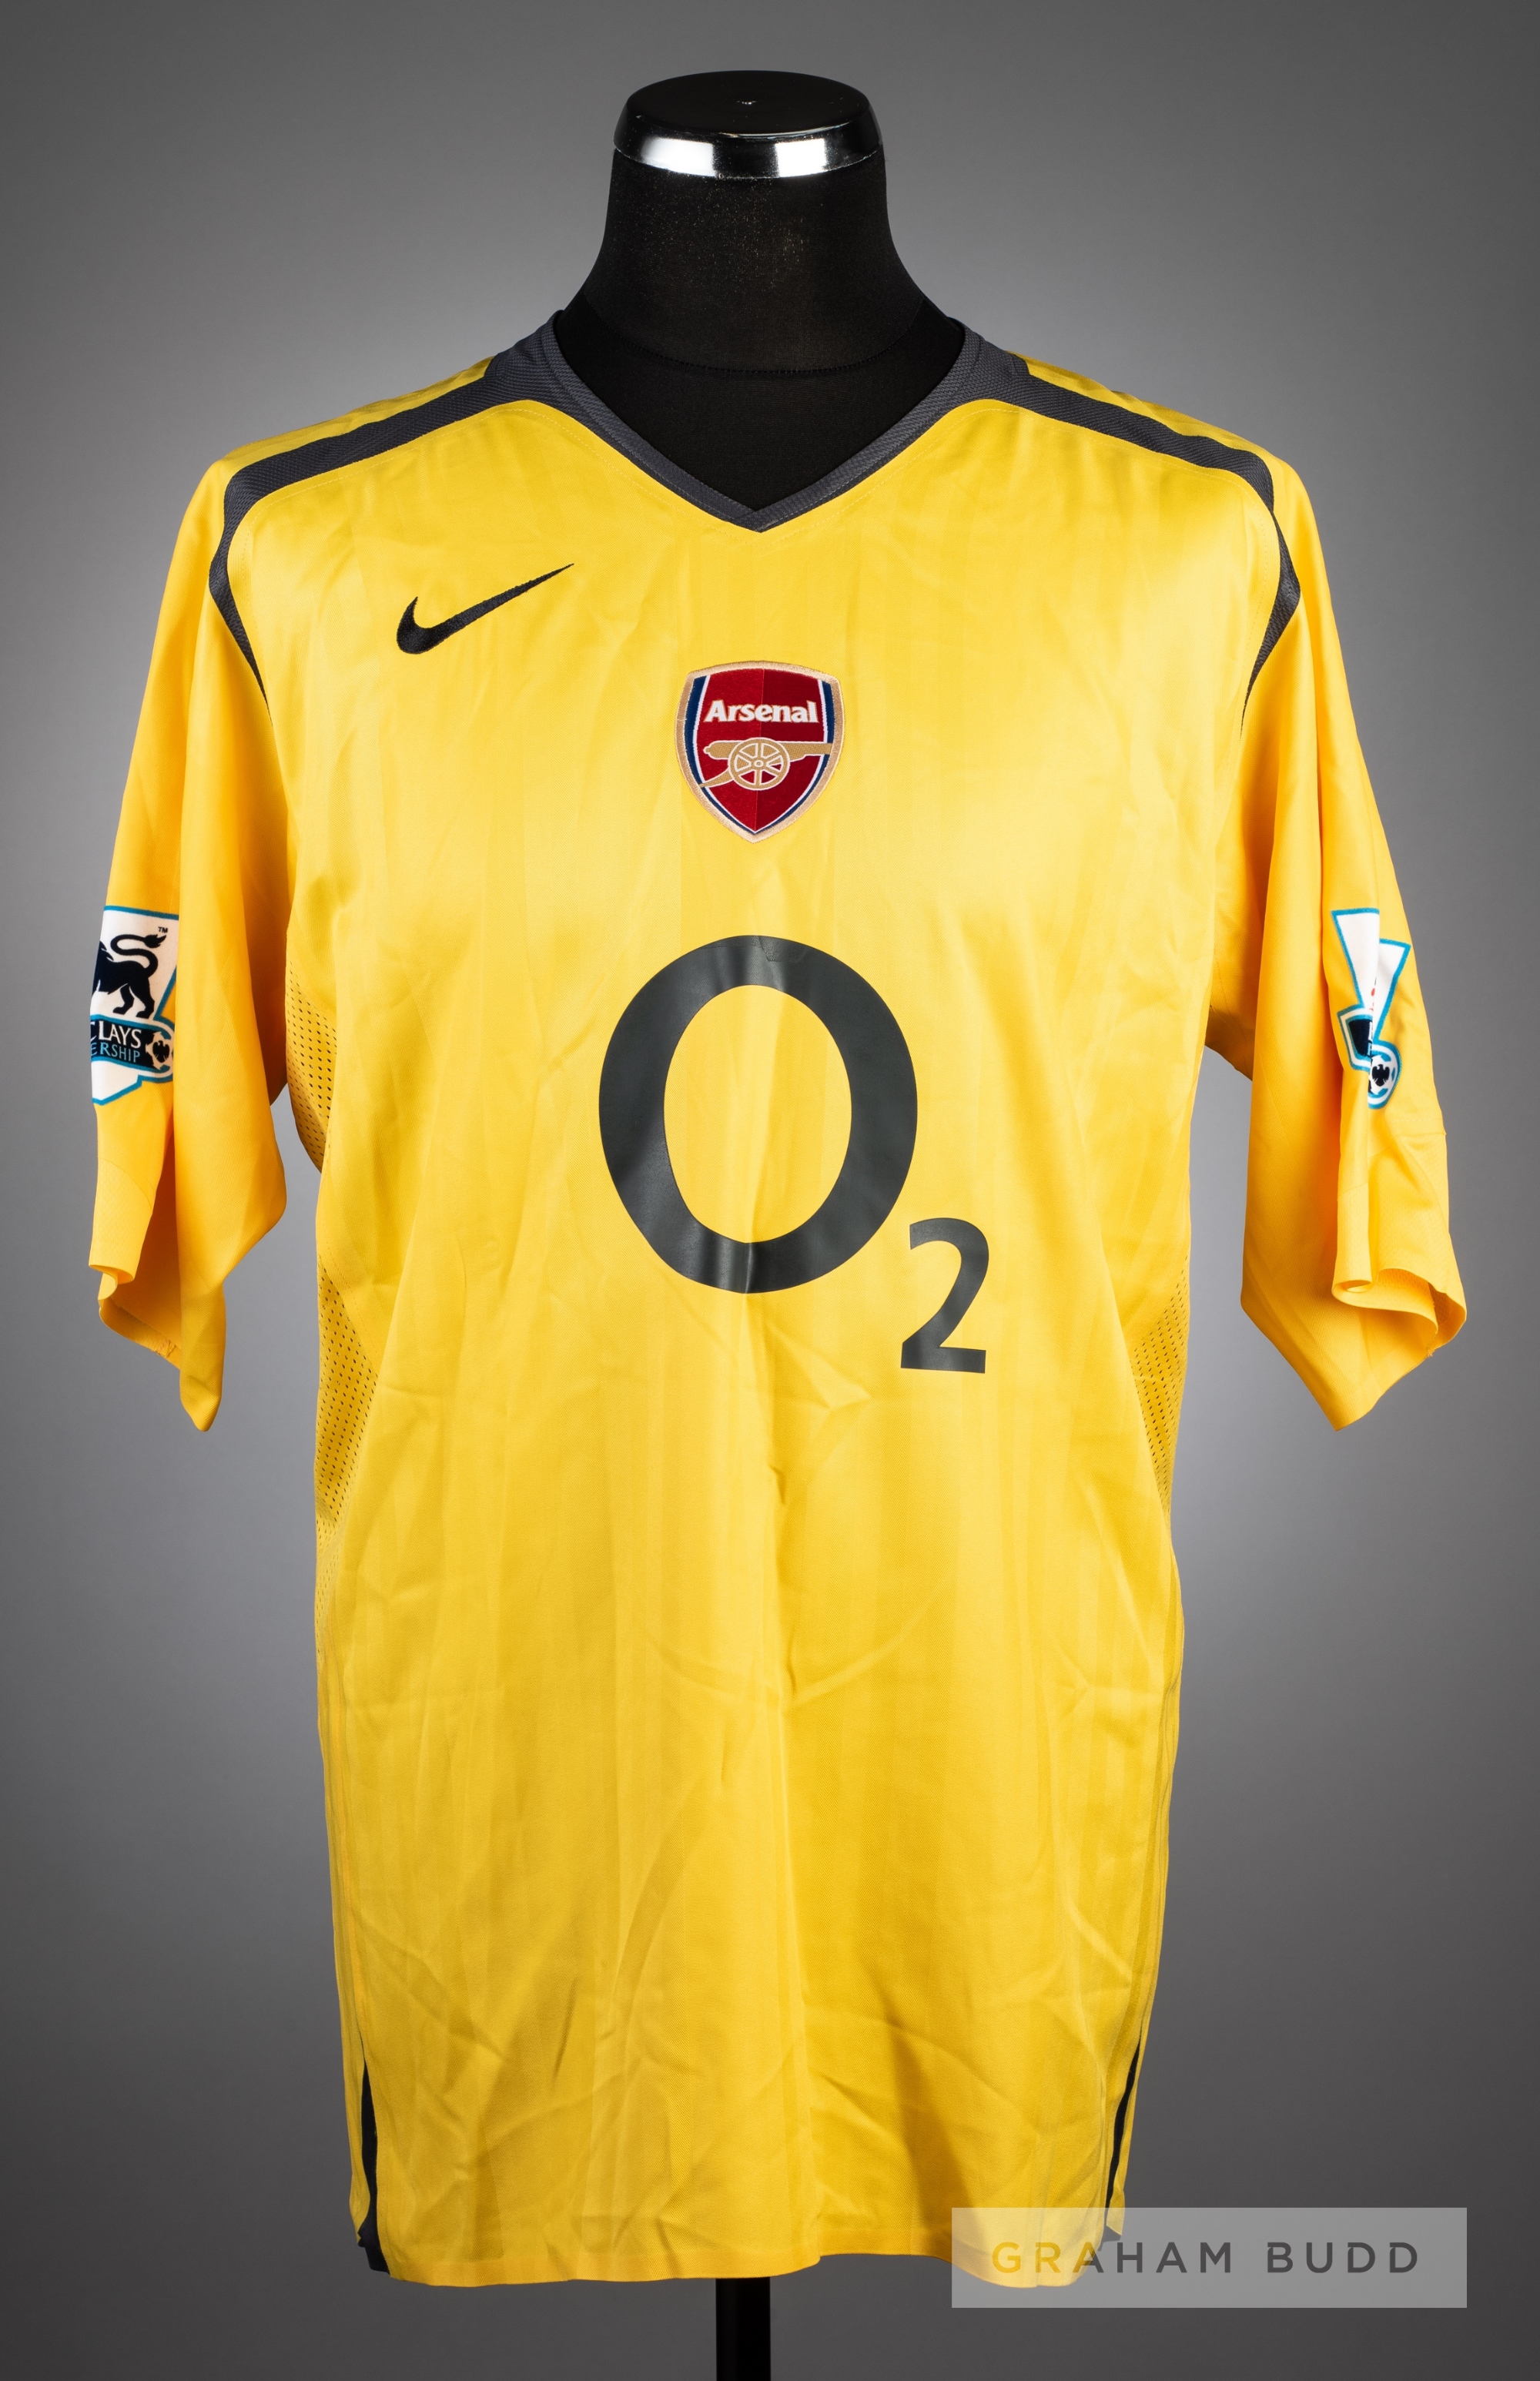 Philippe Senderos signed yellow Arsenal No.20 away jersey, season 2005-06, short-sleeved, with